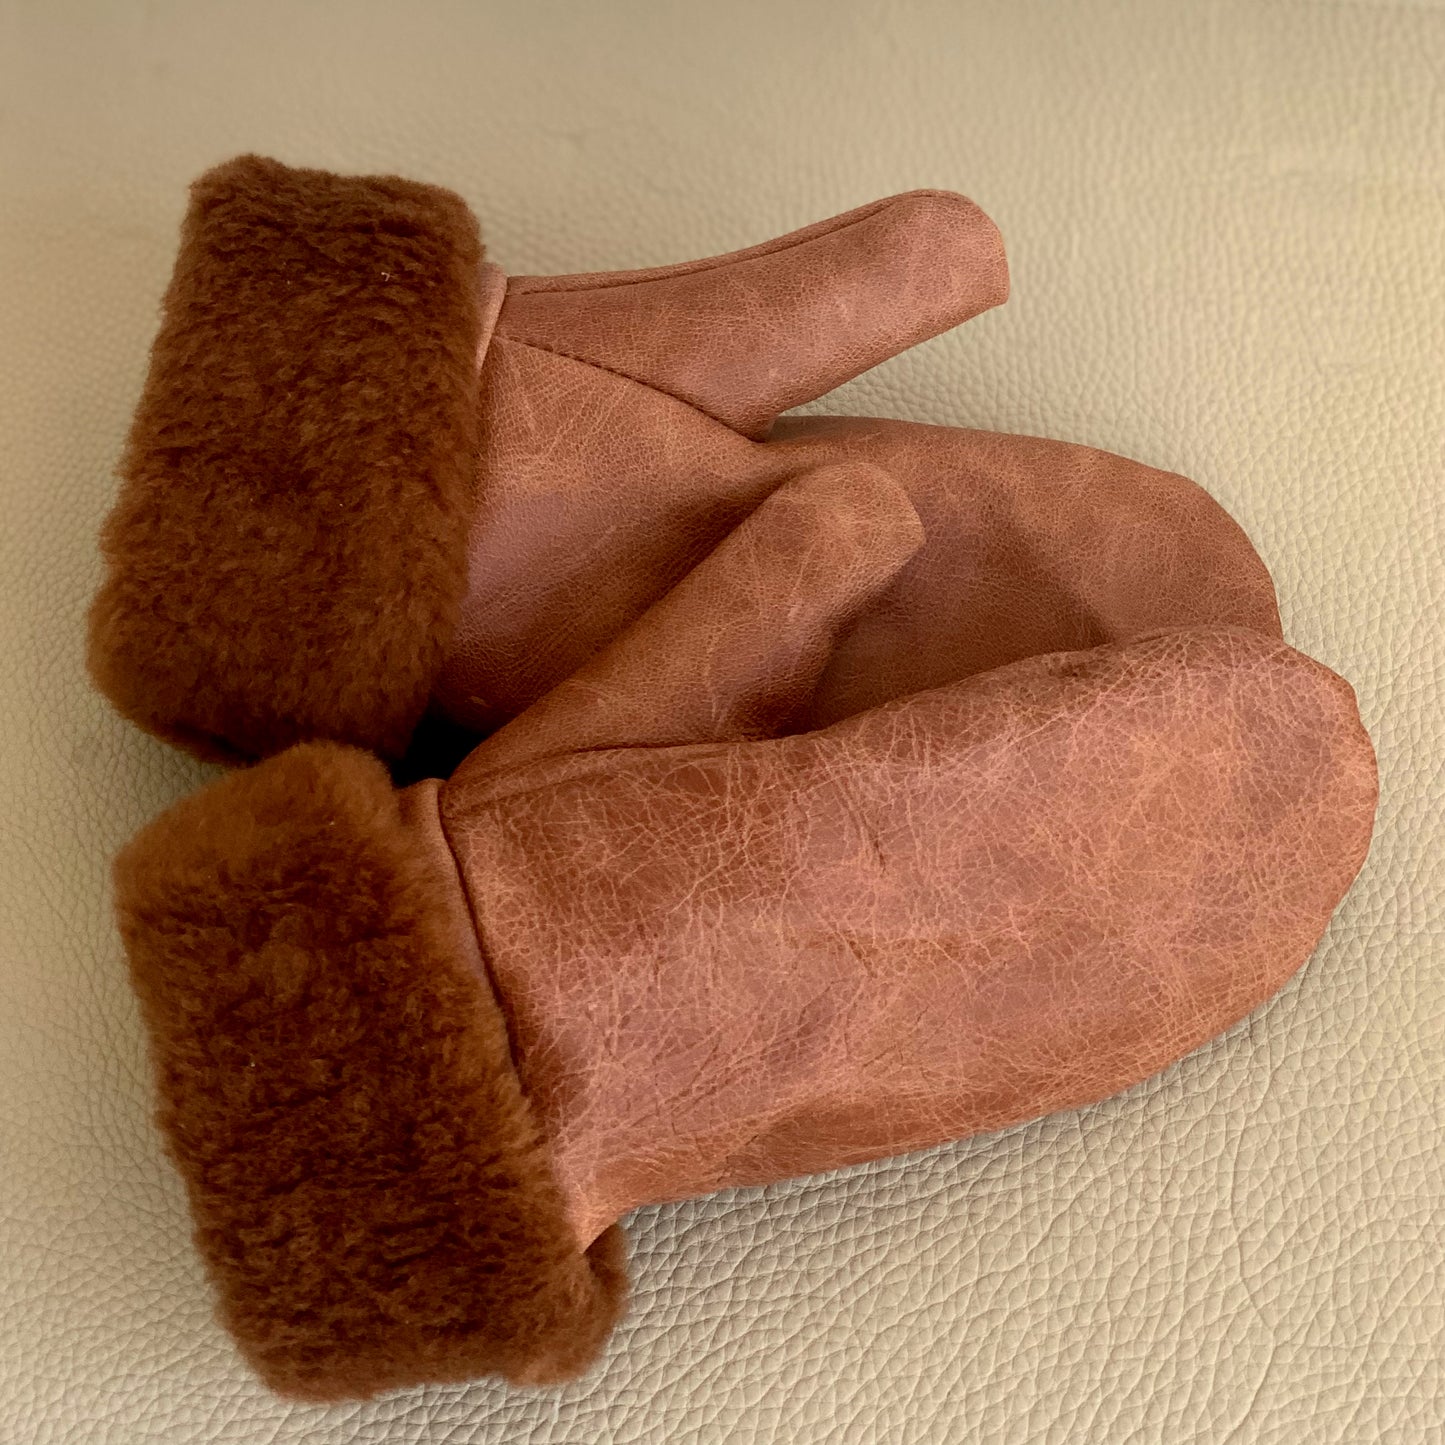 Padded leather gloves (mittens) , size L-XL (Color: WHISKEY)